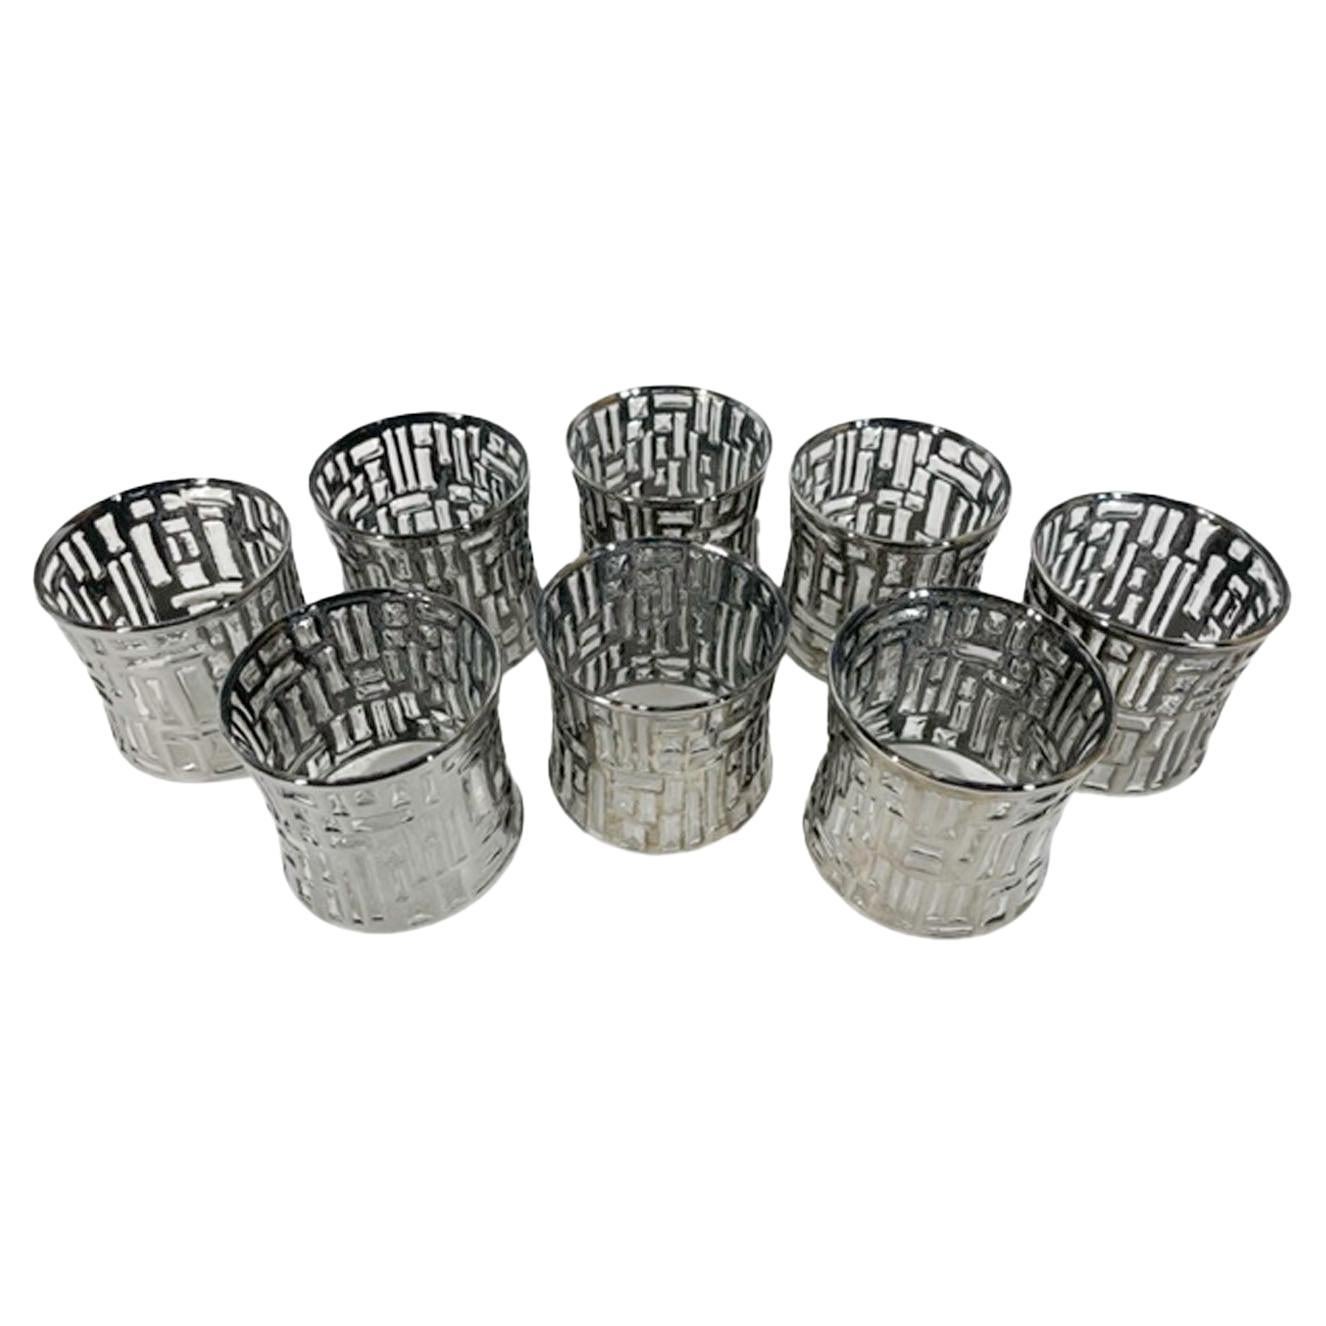 8 Vintage Rocks Glasses in the Silver Version of the Artica Pattern by Libbey For Sale